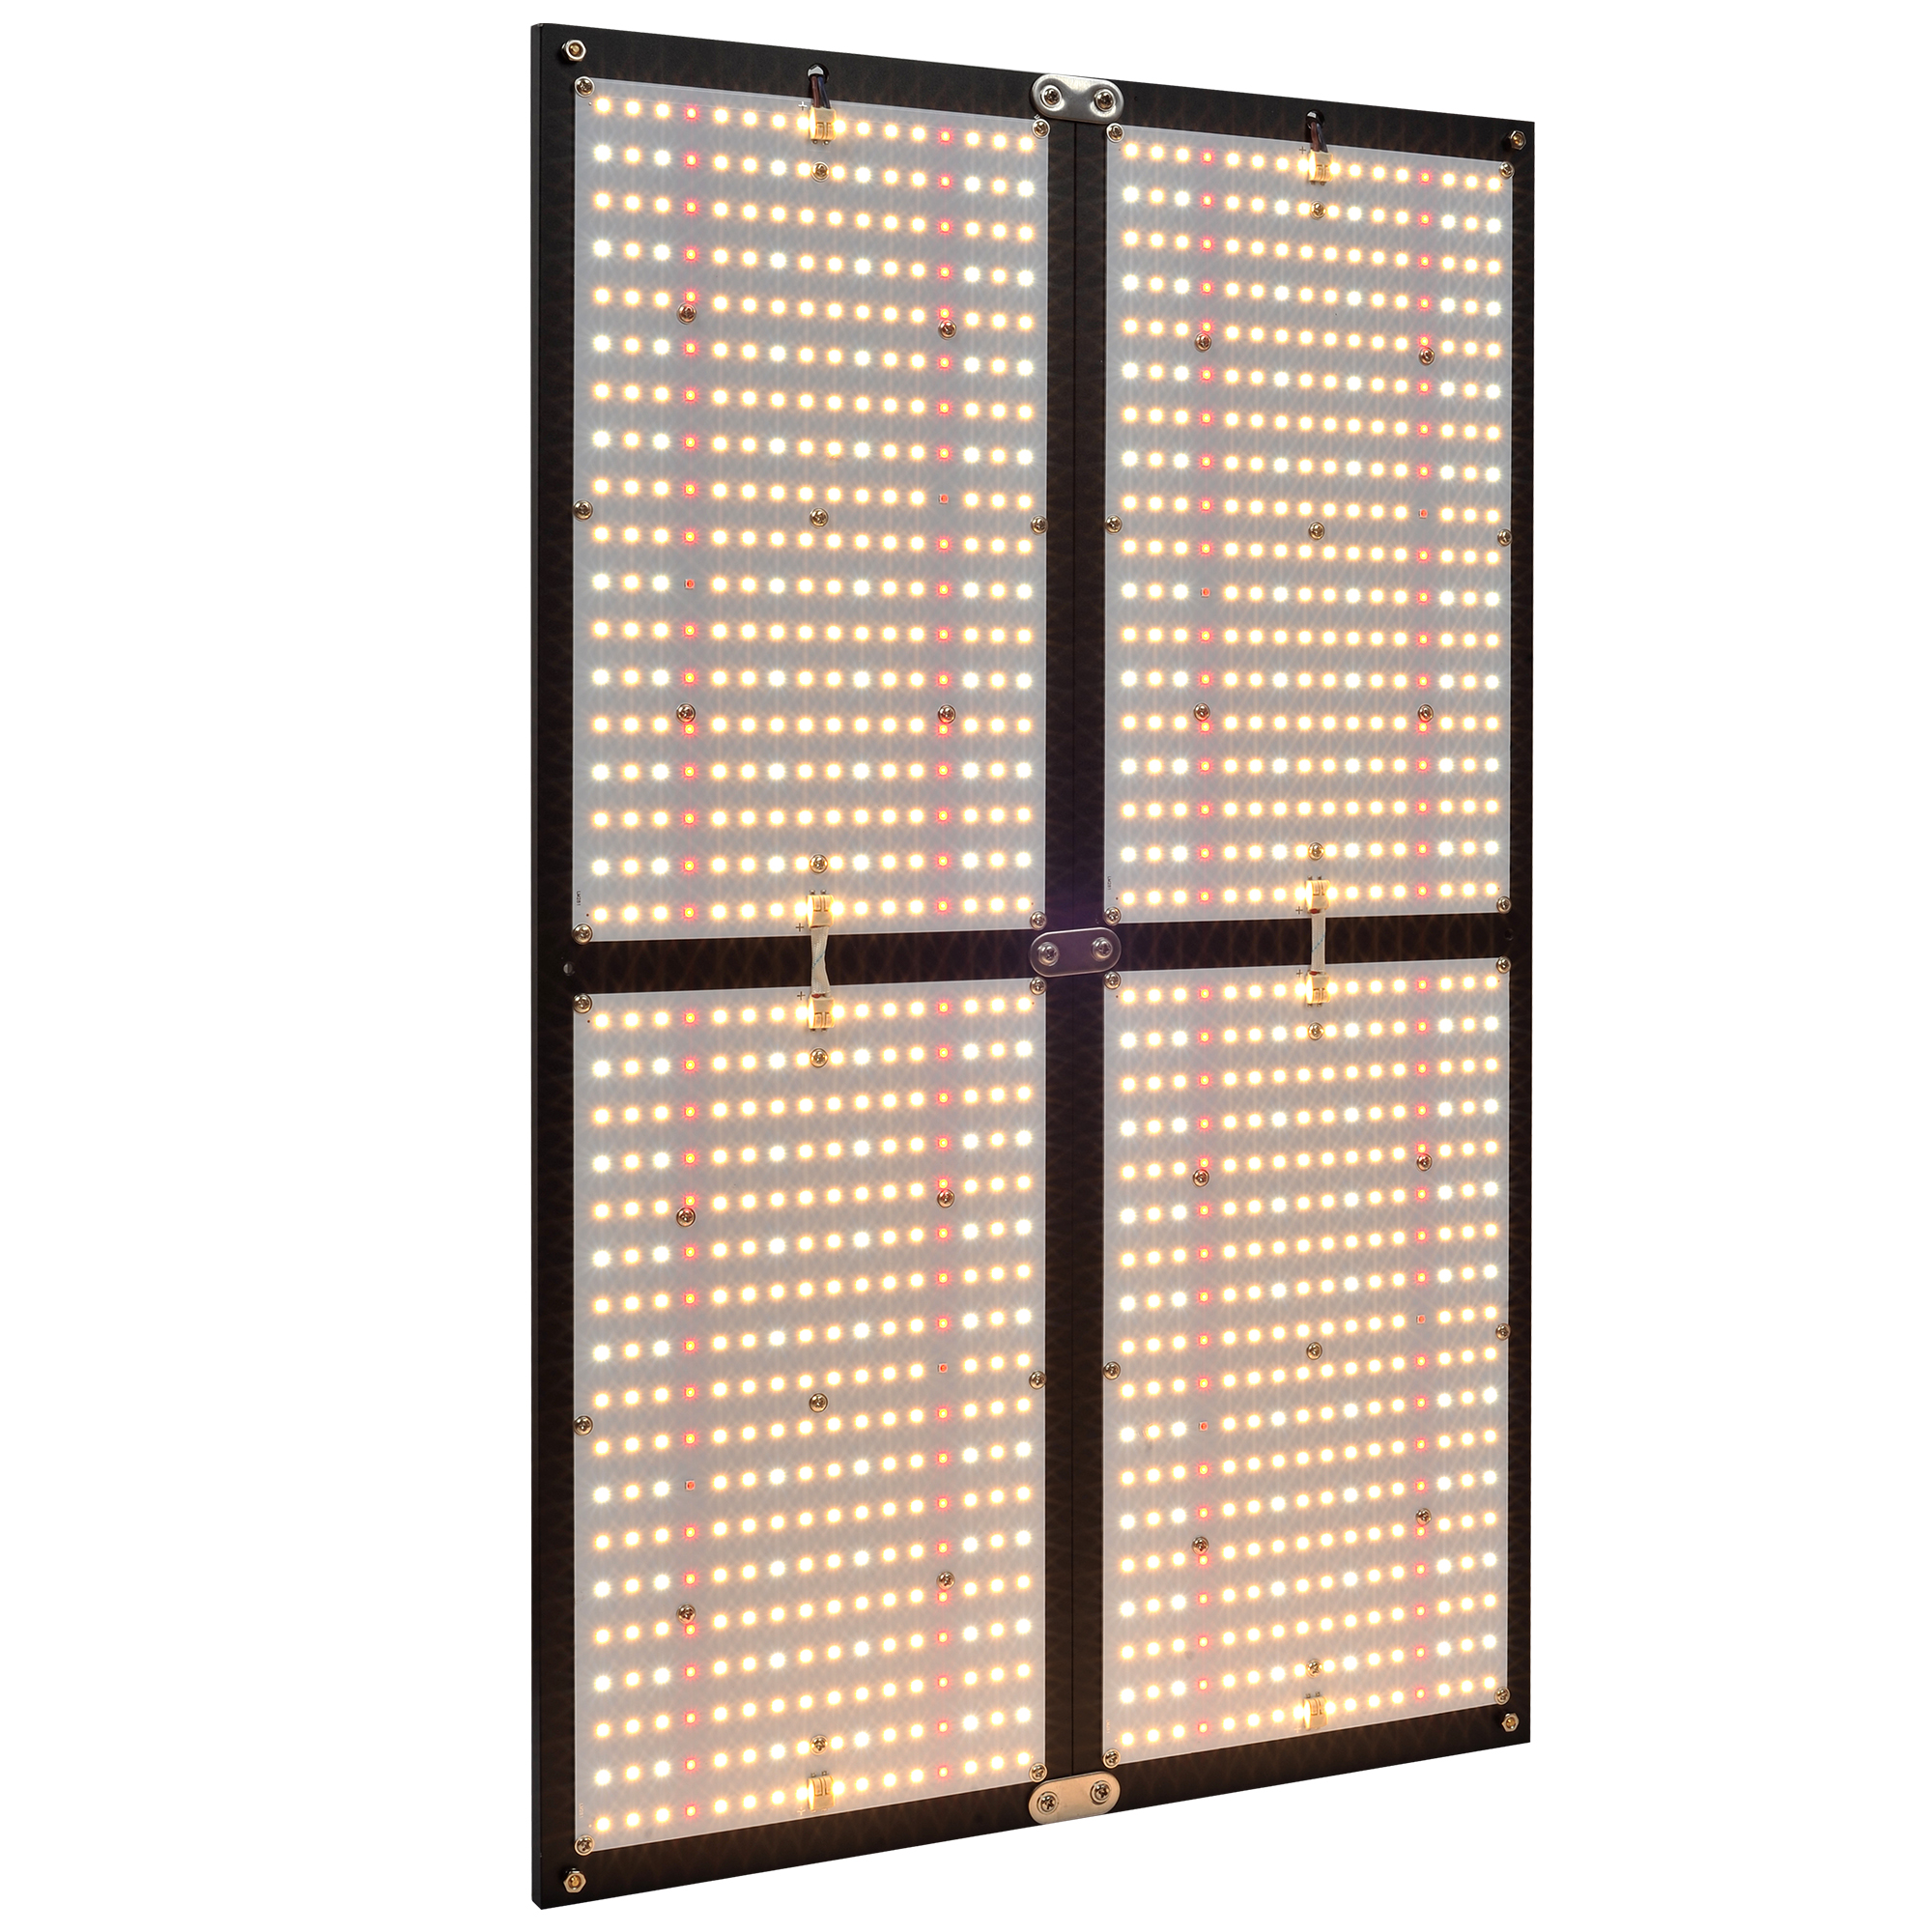 

480W Samsung LED Grow Light Board Full Spectrum QB288 Growing Lamp for Indoor Plants with 3000K 5000K 660nm IR